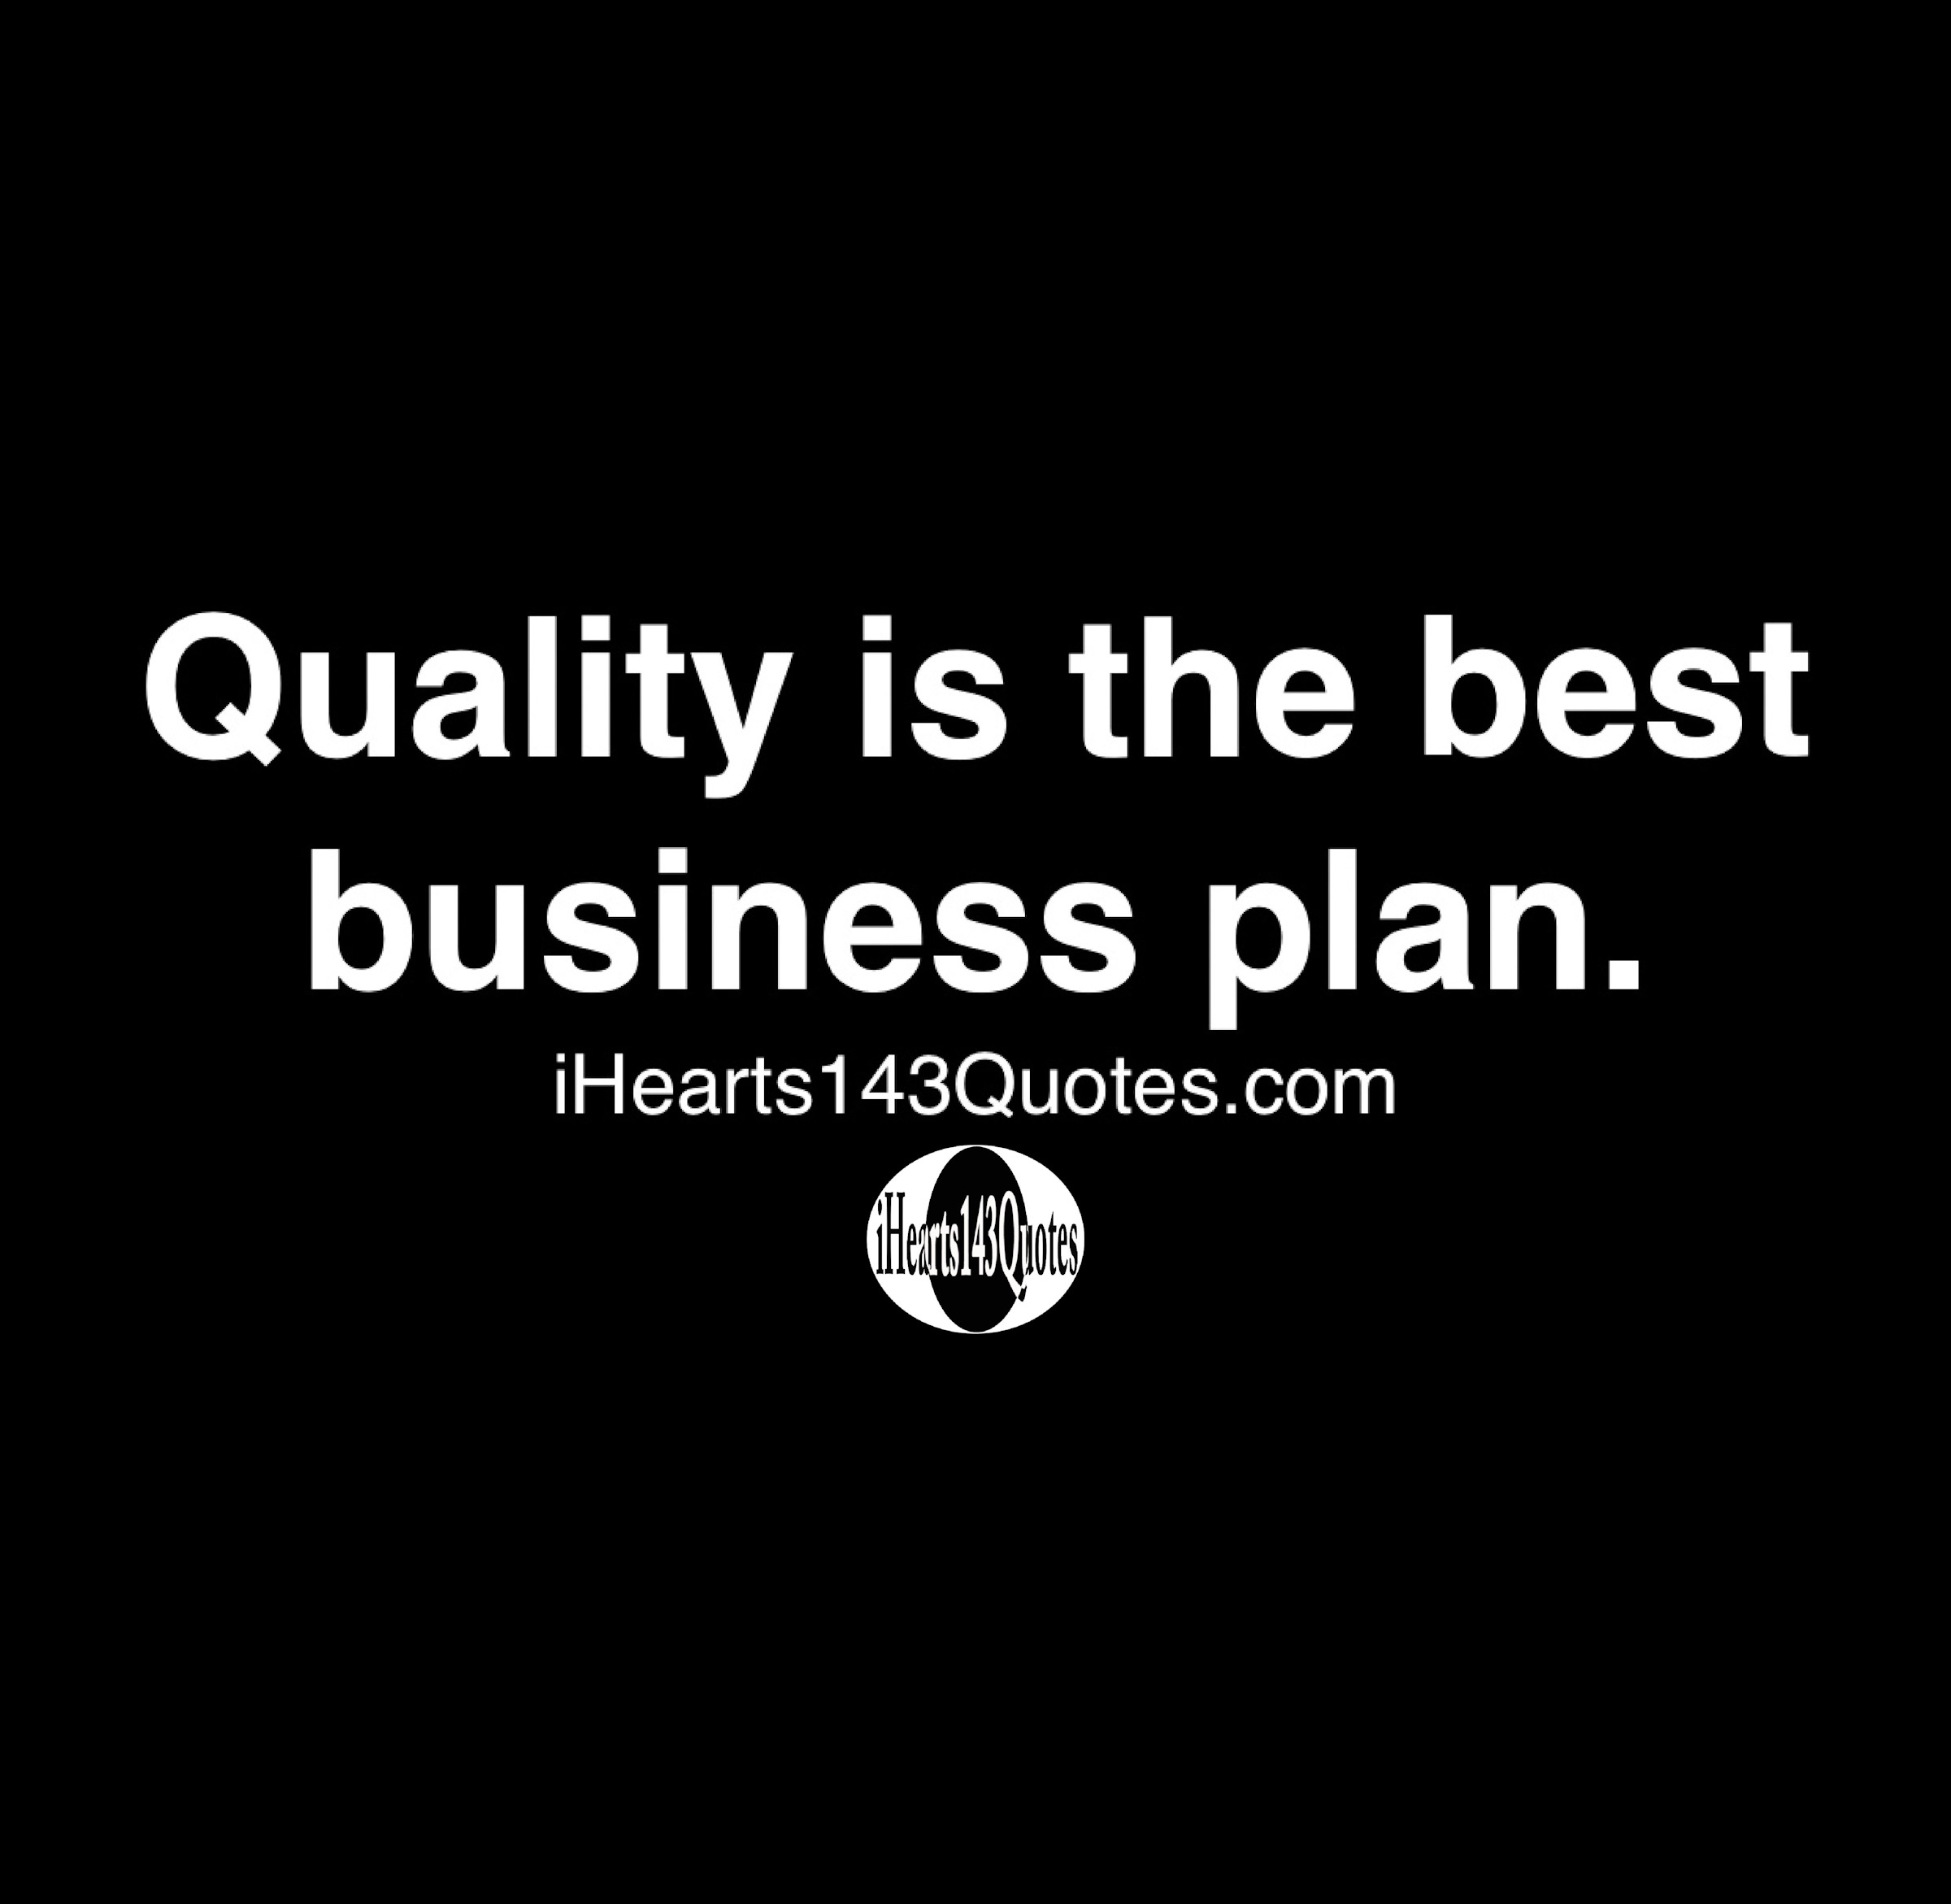 who said quality is the best business plan